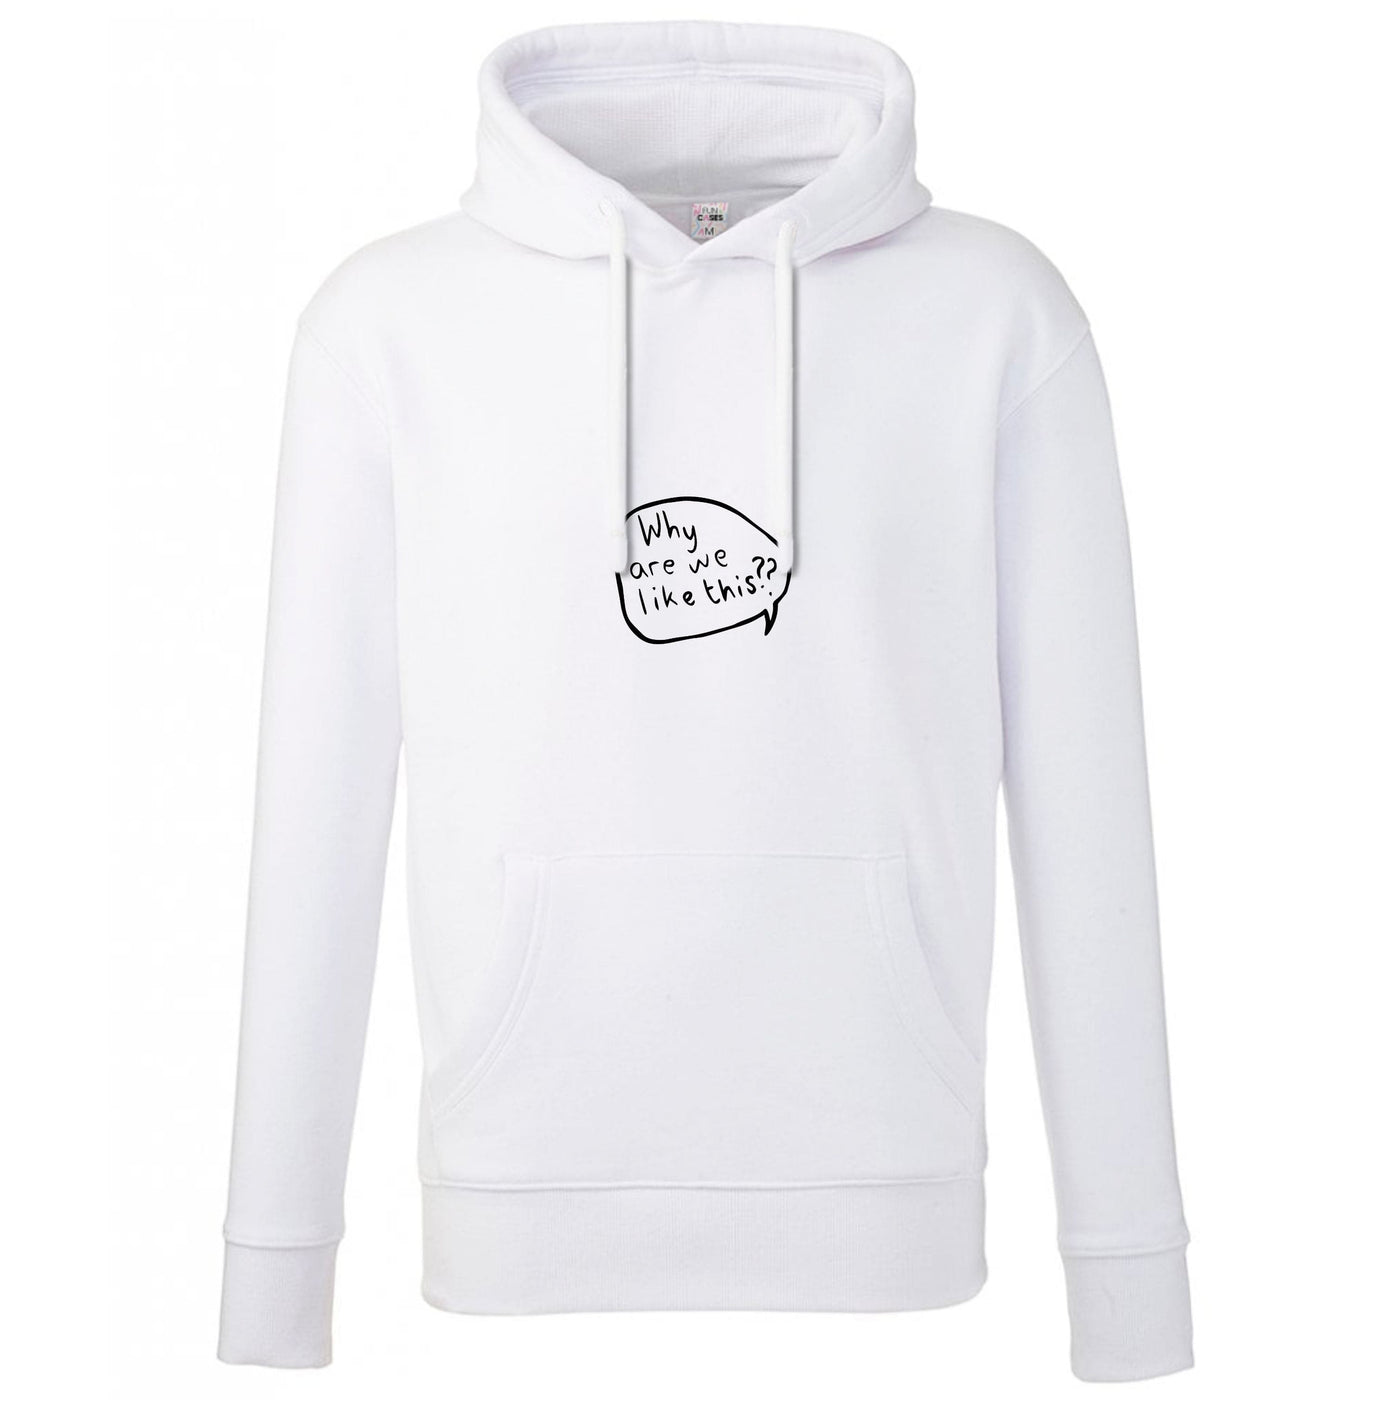 Why Are We Like This - Heartstopper Hoodie